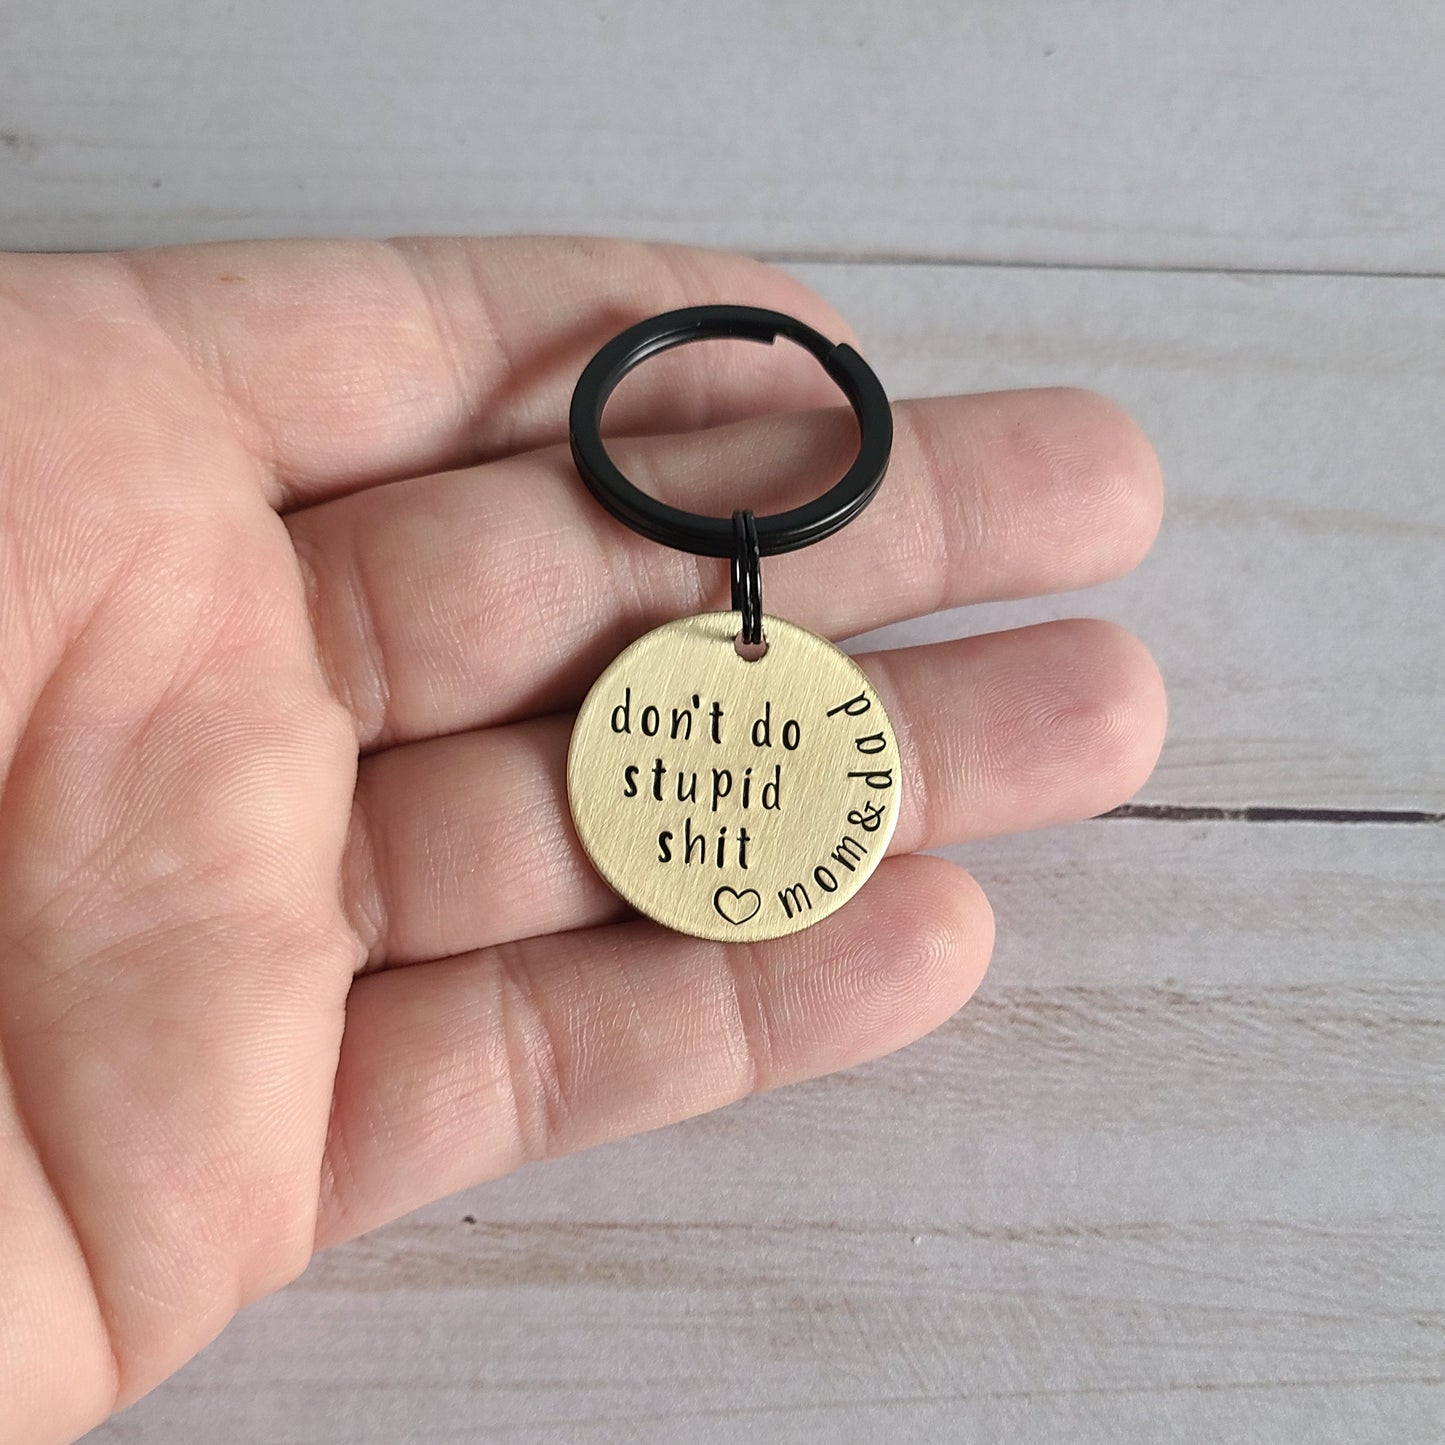 Don't Do Stupid Shit Love Mom and Dad Keychain, Teen Driver Gifts, Funny Handstamped Key Ring for Teenagers, Sweet 16 Gifts